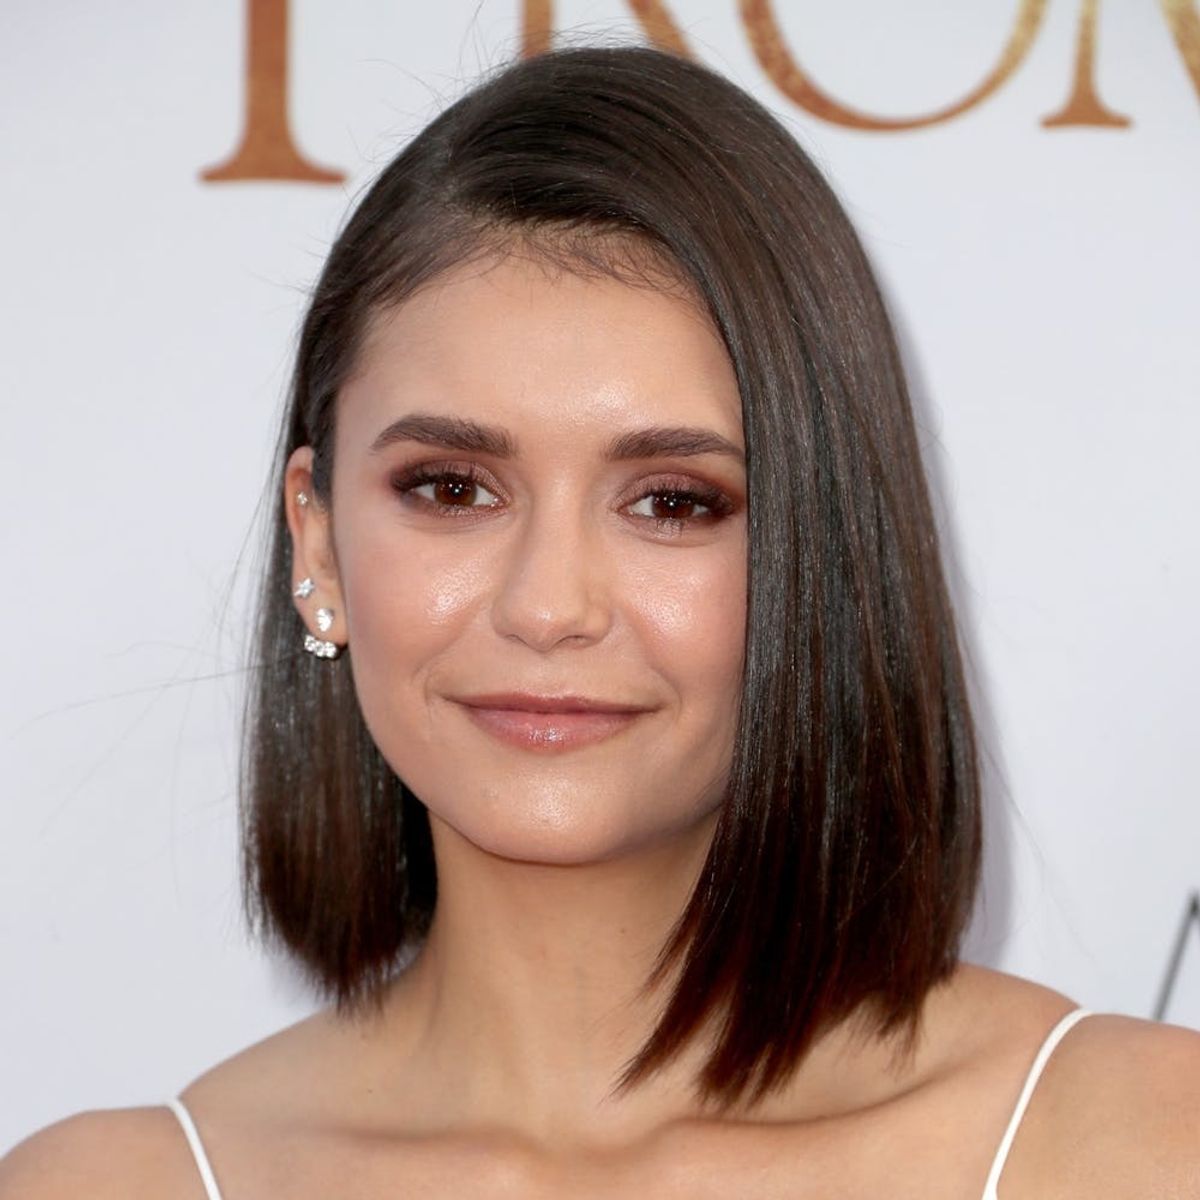 Watch: Nina Dobrev Doing Her Makeup in 90 Seconds Is Seriously Impressive